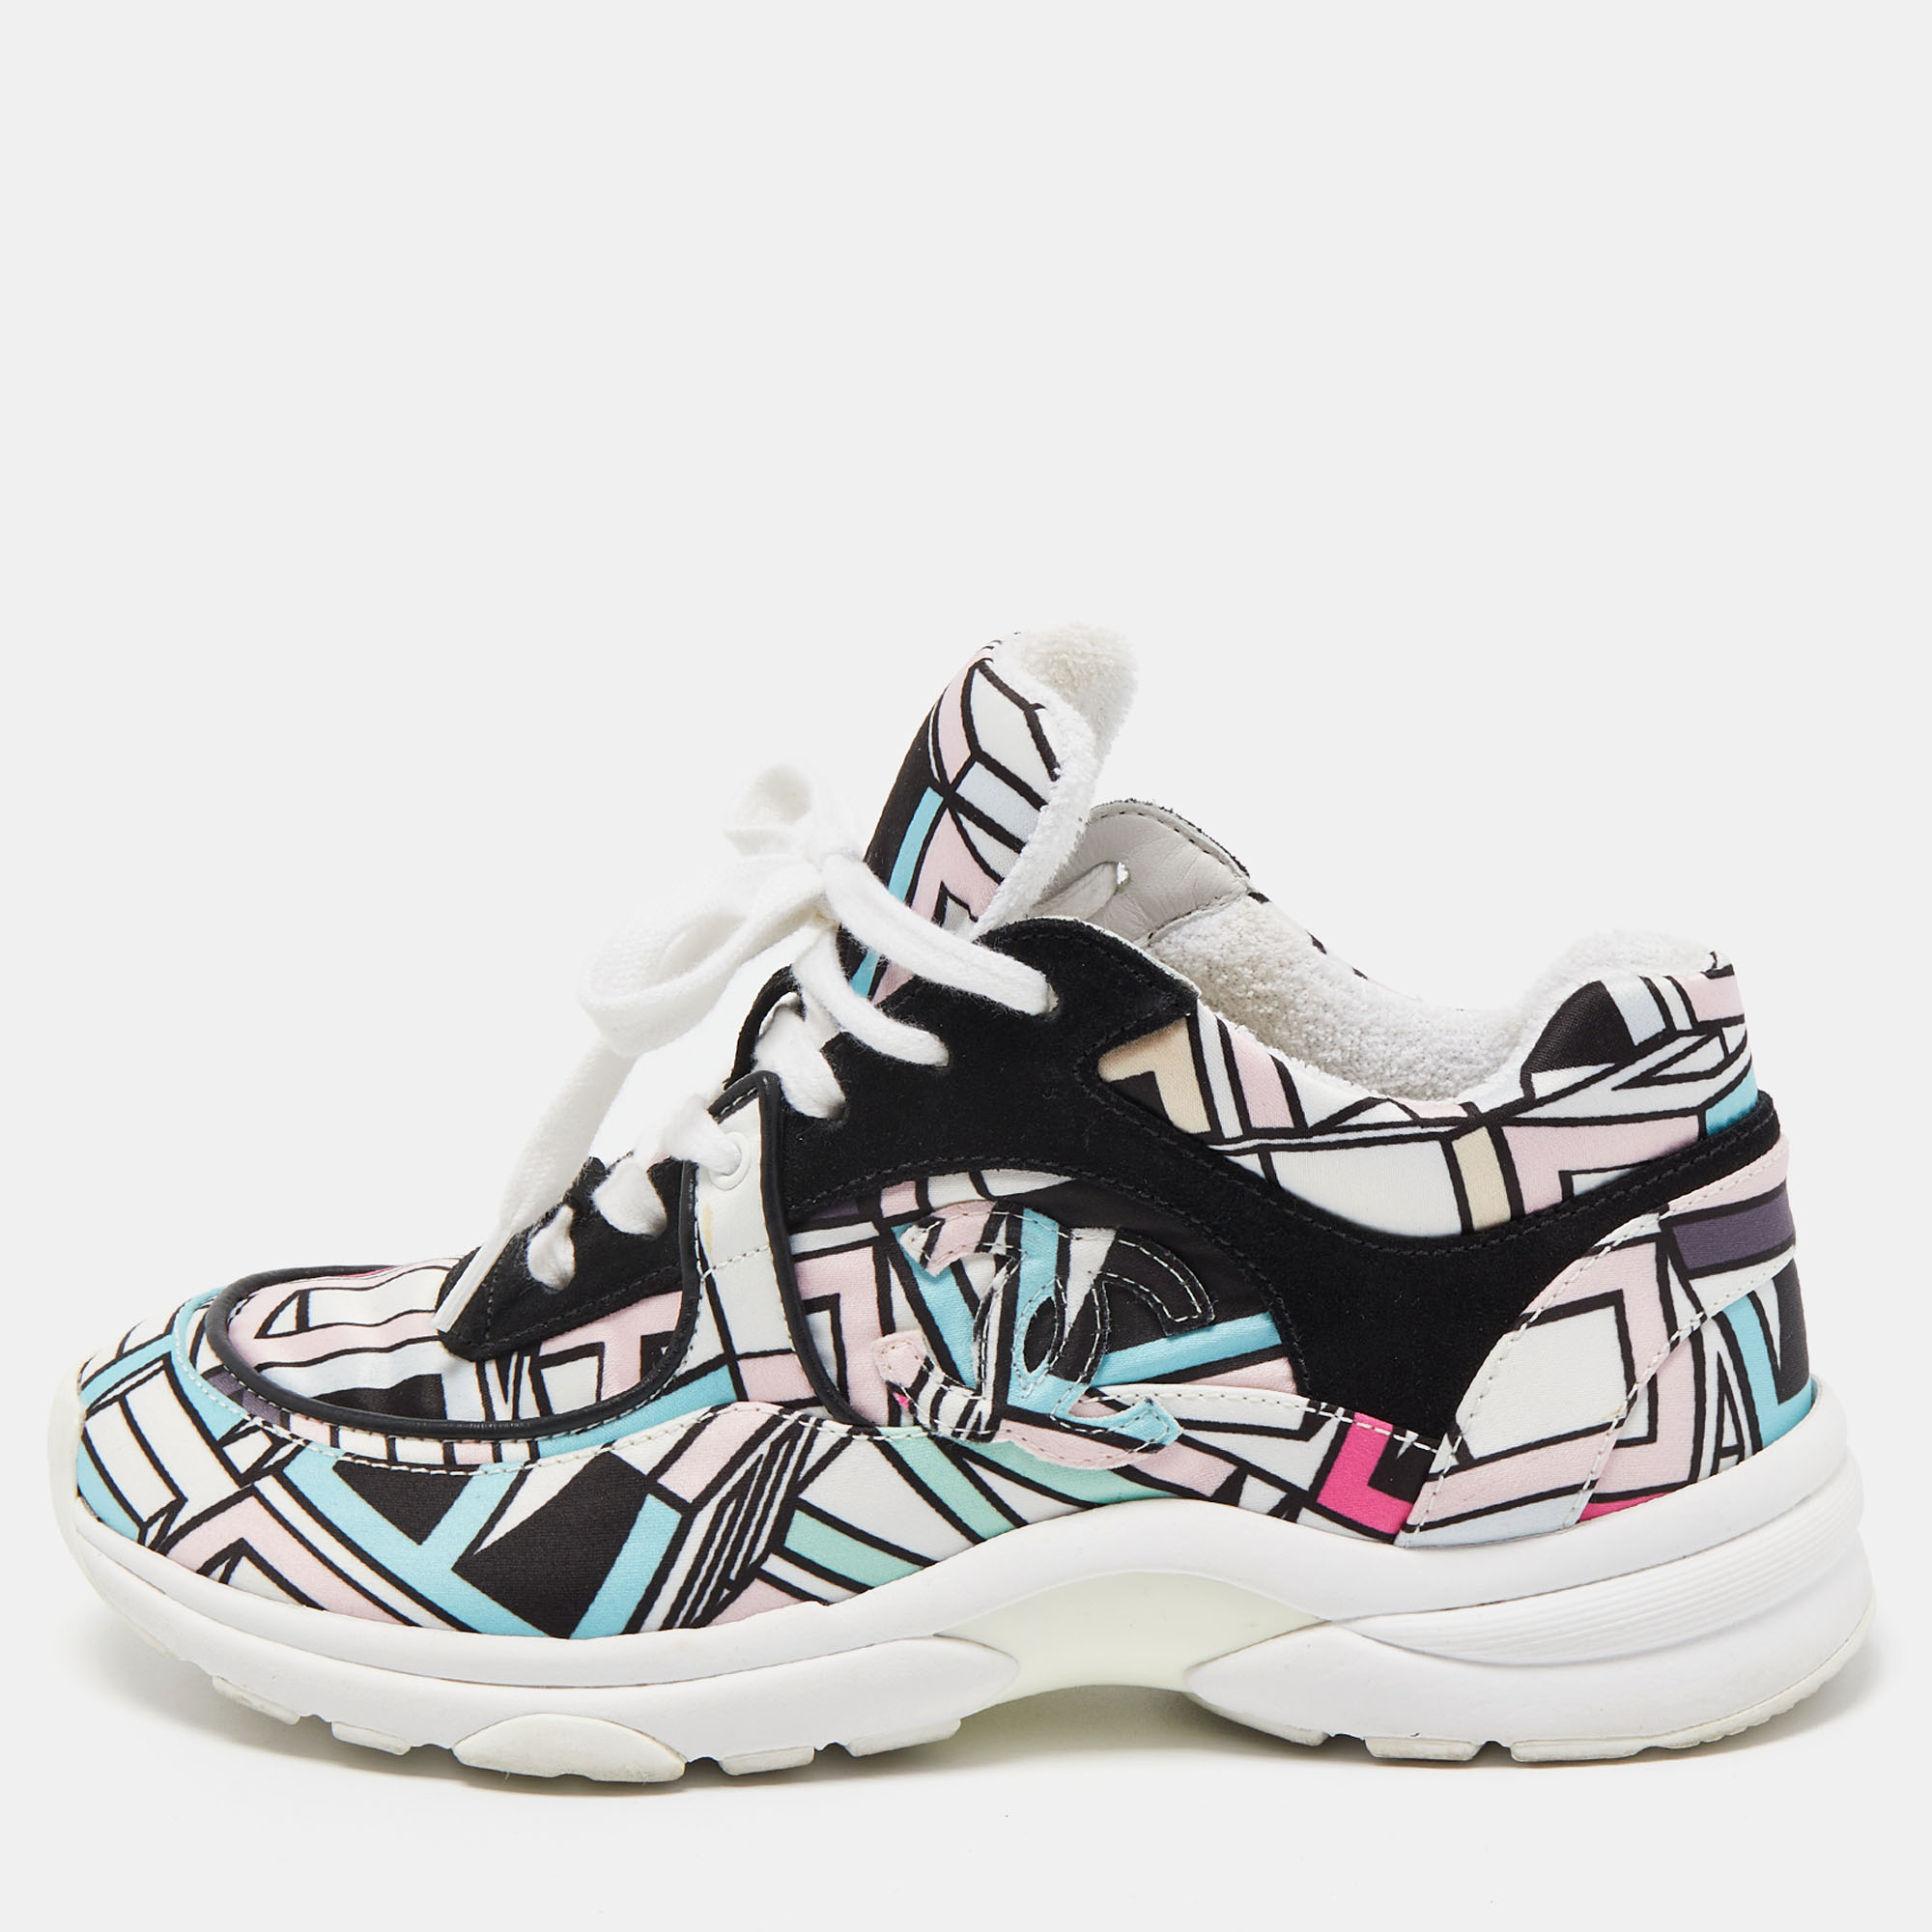 Pre-owned Chanel Multicolor Abstract Print Satin And Suede Cc Logo Trainer Low Top Sneakers Size 35.5